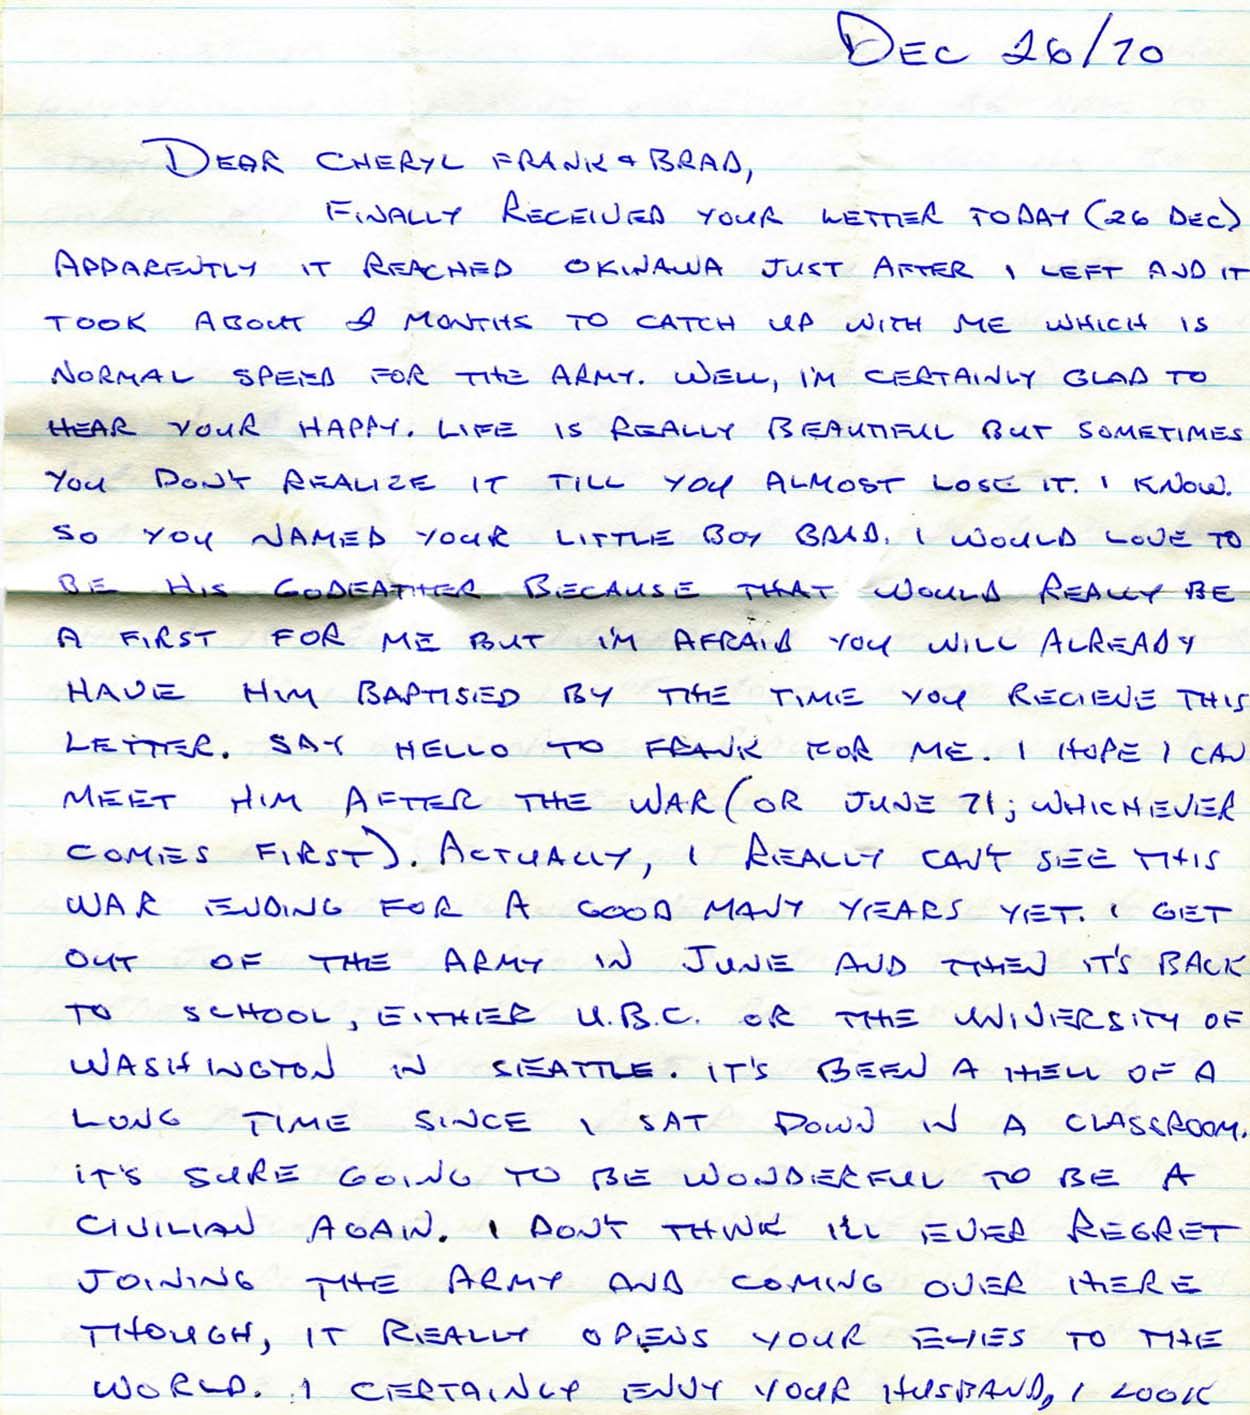 Page 1 of the letter